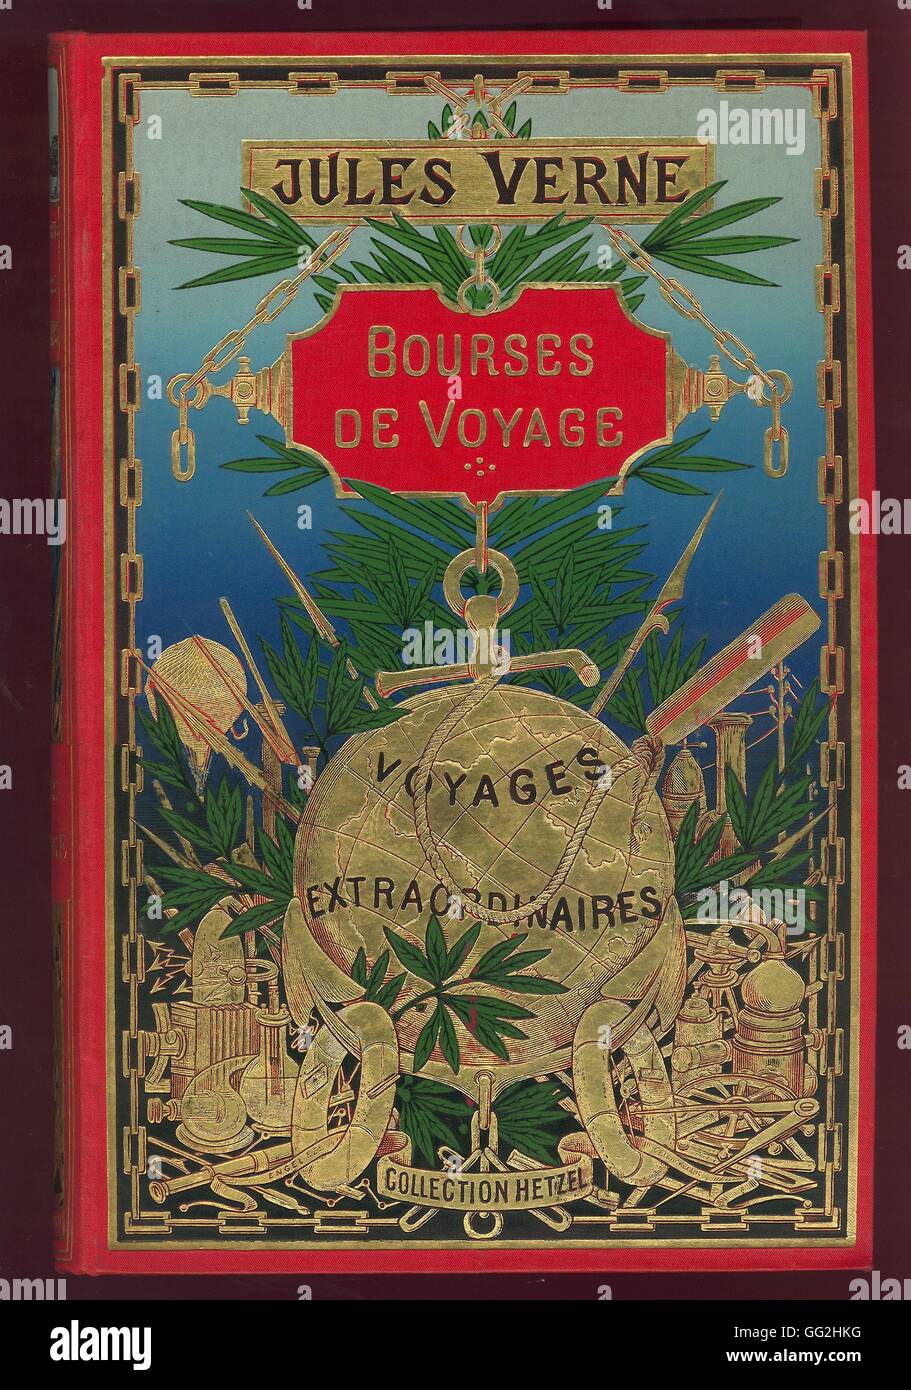 Les Voyages extraordinaires, Jules Verne Published as a serial novel in 1902-1903 Collection Hetzel Stock Photo